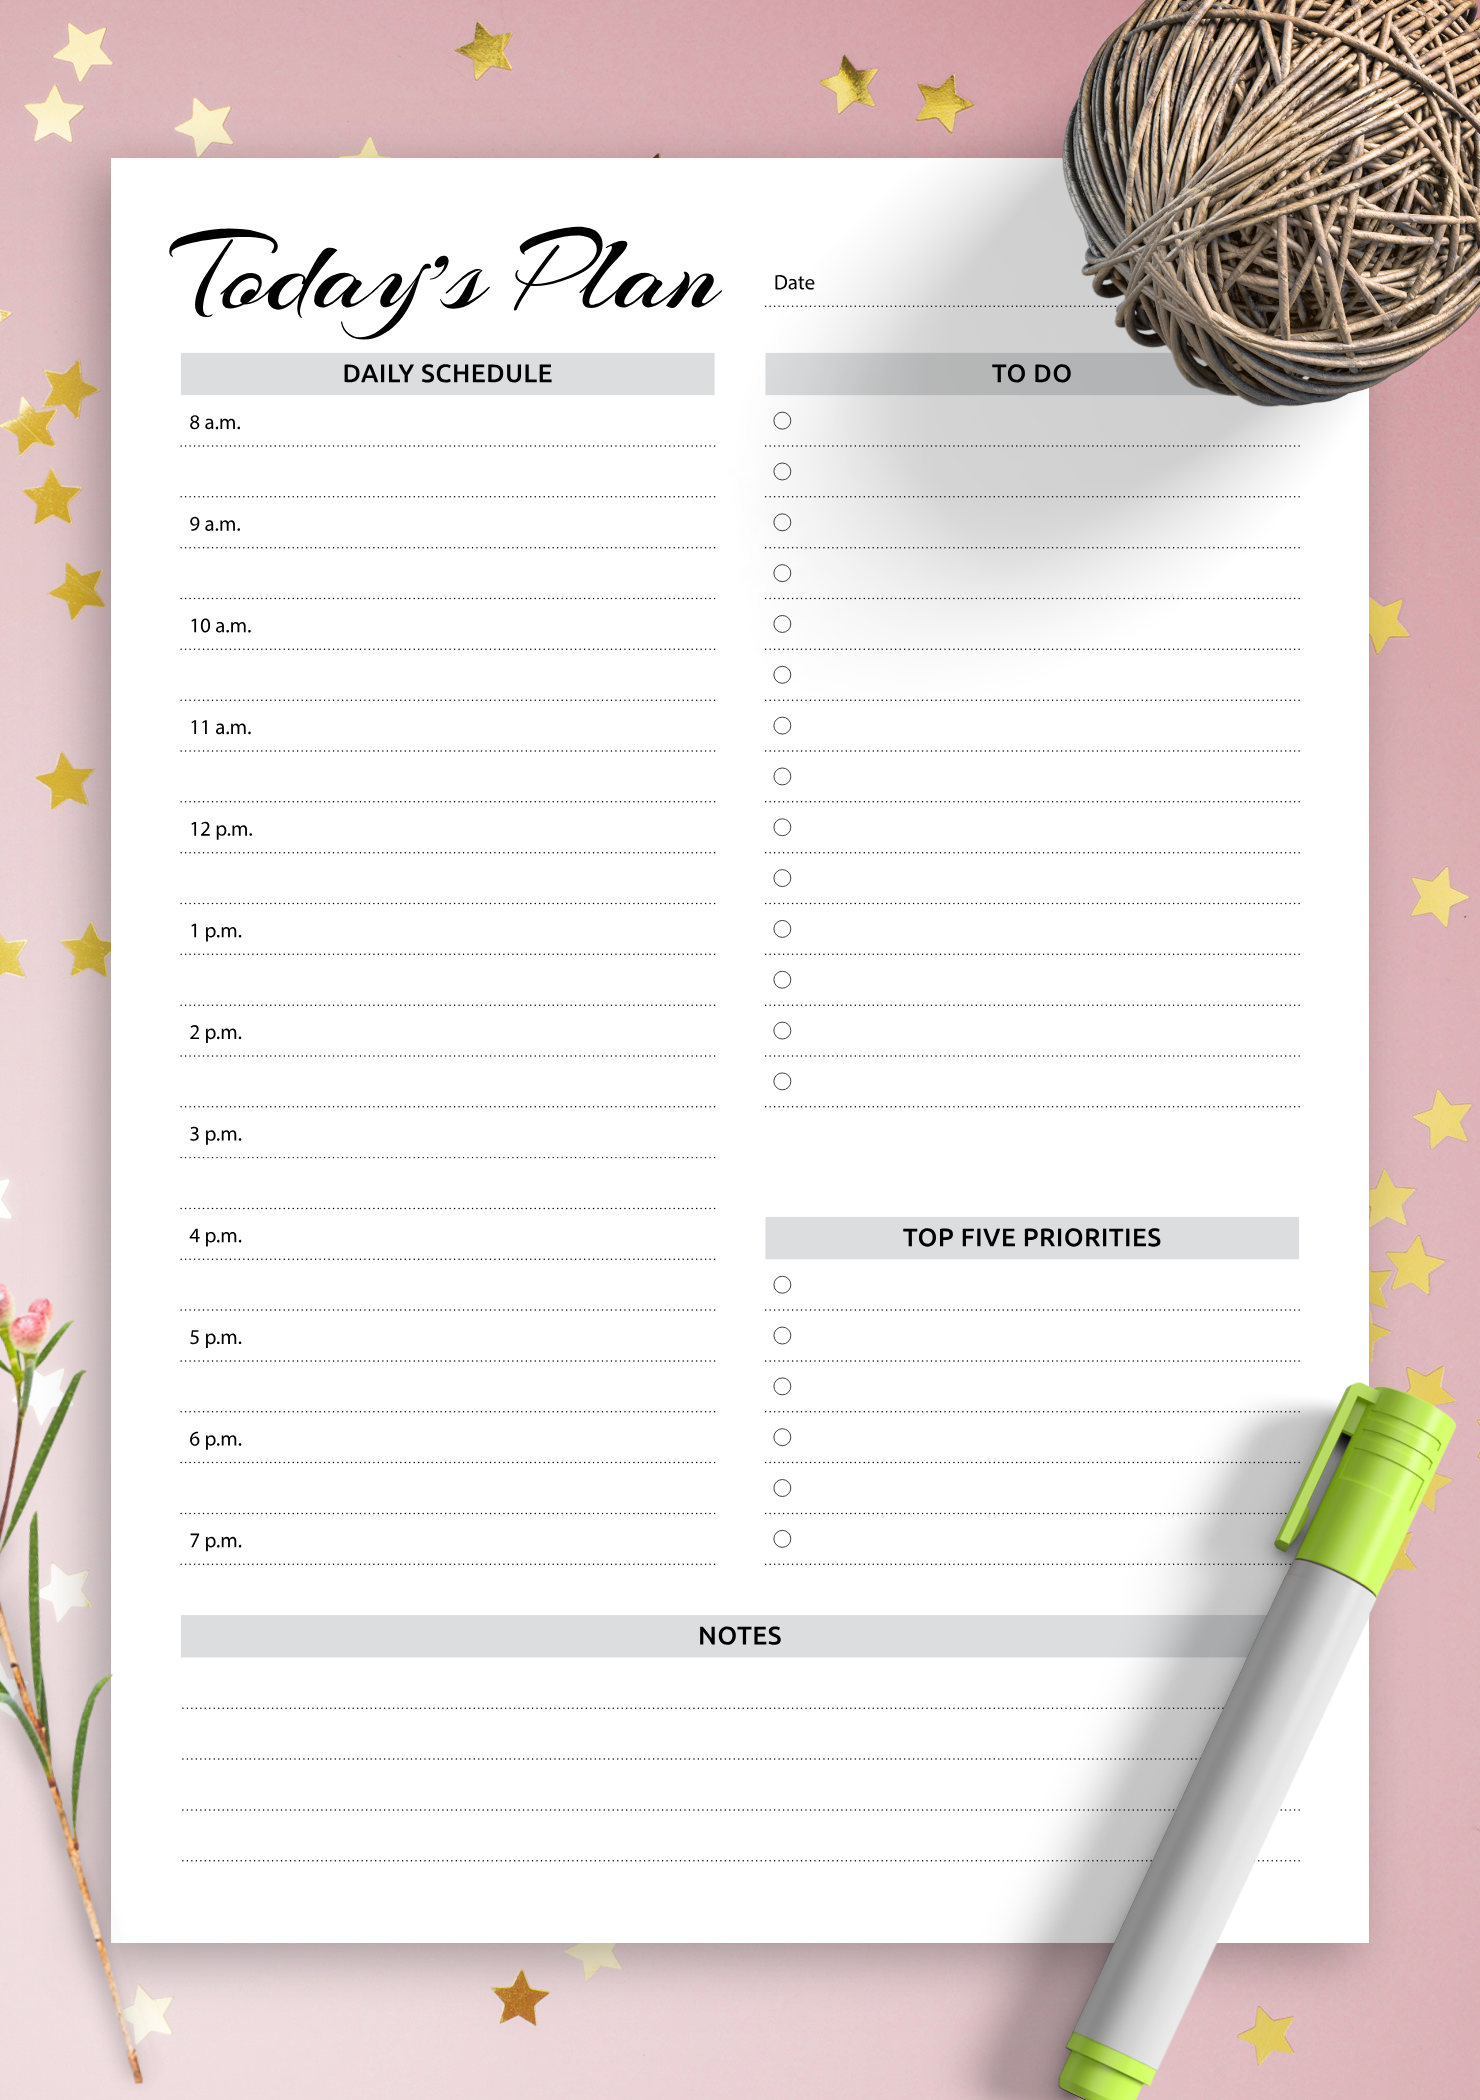 Download Printable Daily planner with hourly schedule & to-do list